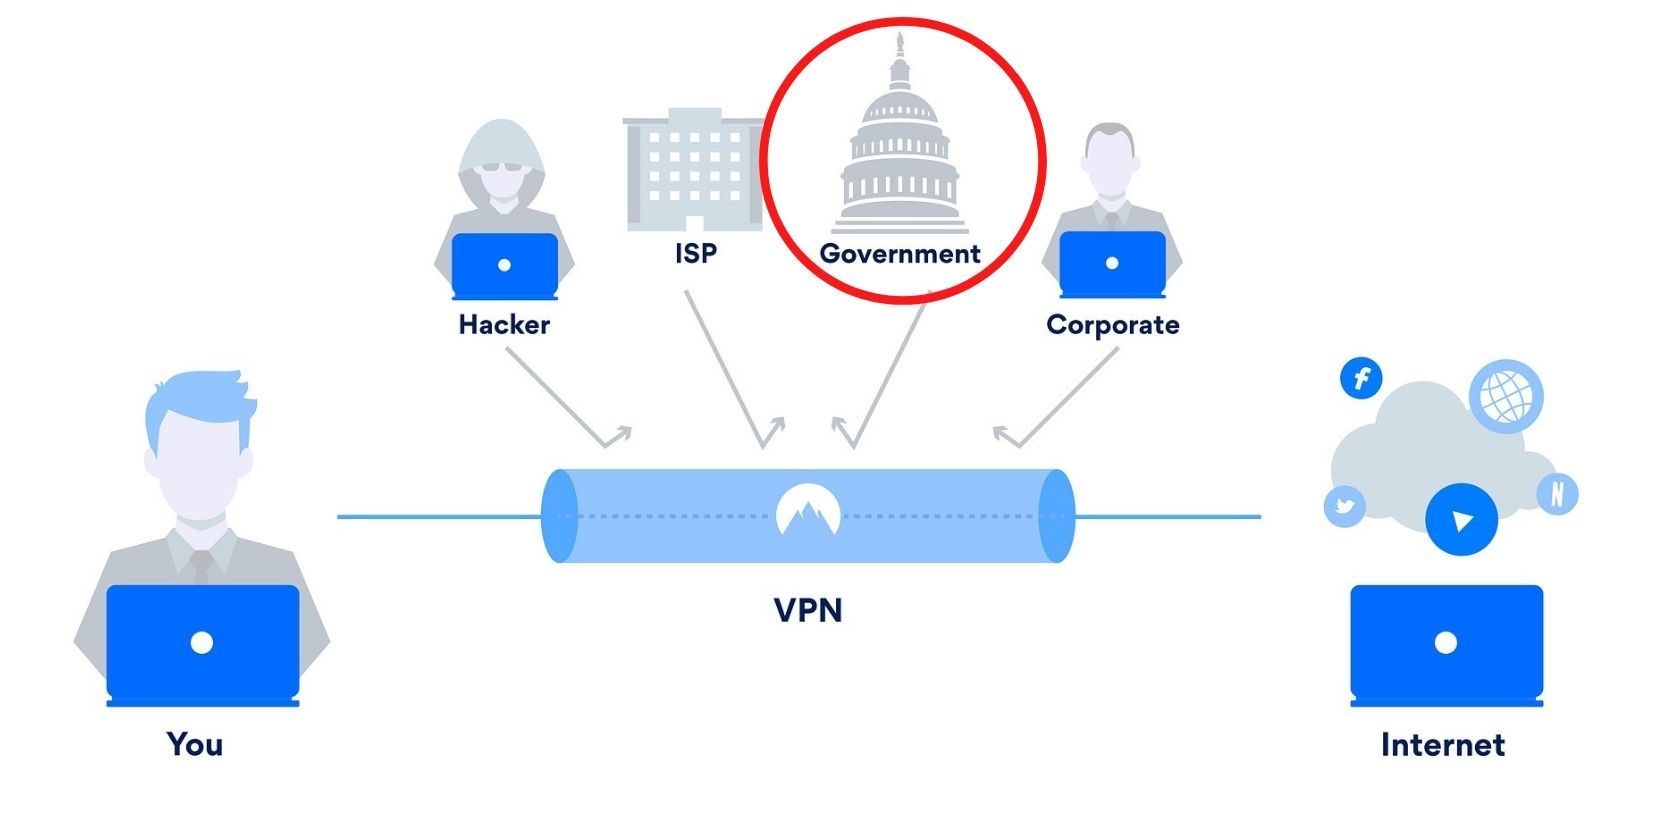 Does VPN protect you from government?